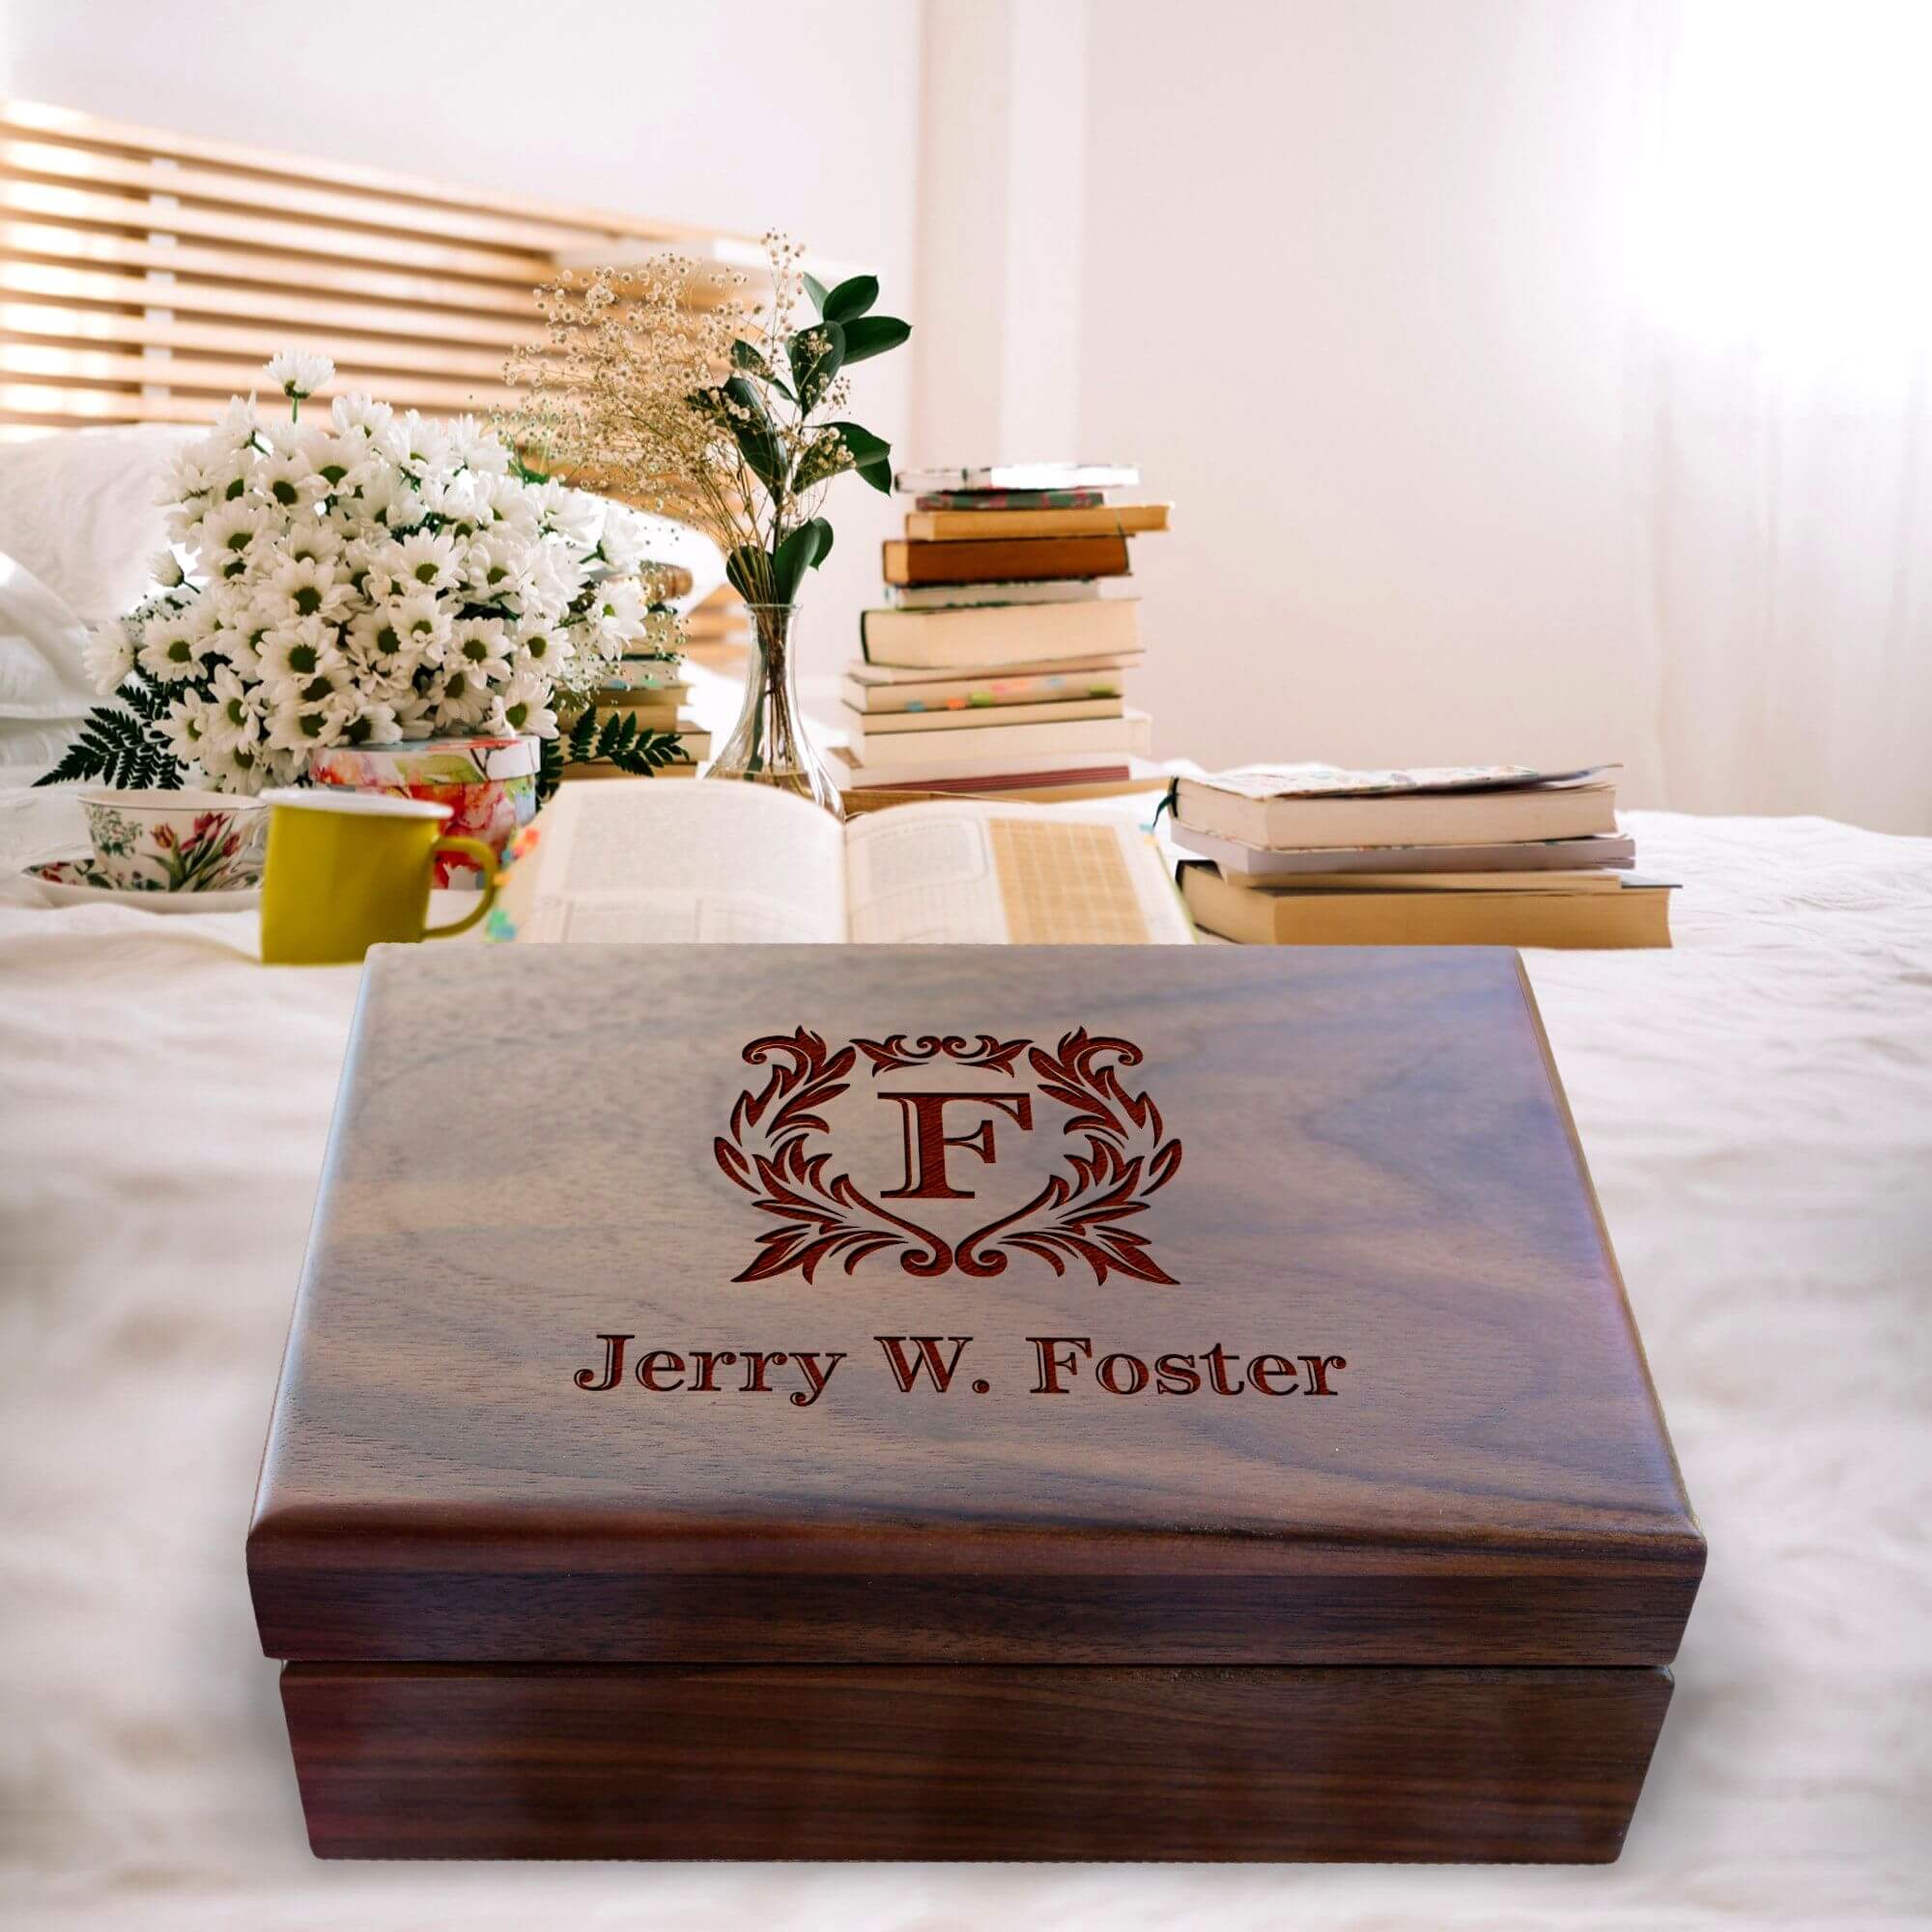  Personalized Keepsake Box - Memory Box for Couples - Wedding  Anniversary Gift - Valentine's Day Gift for Fiance Husband Wife : Handmade  Products